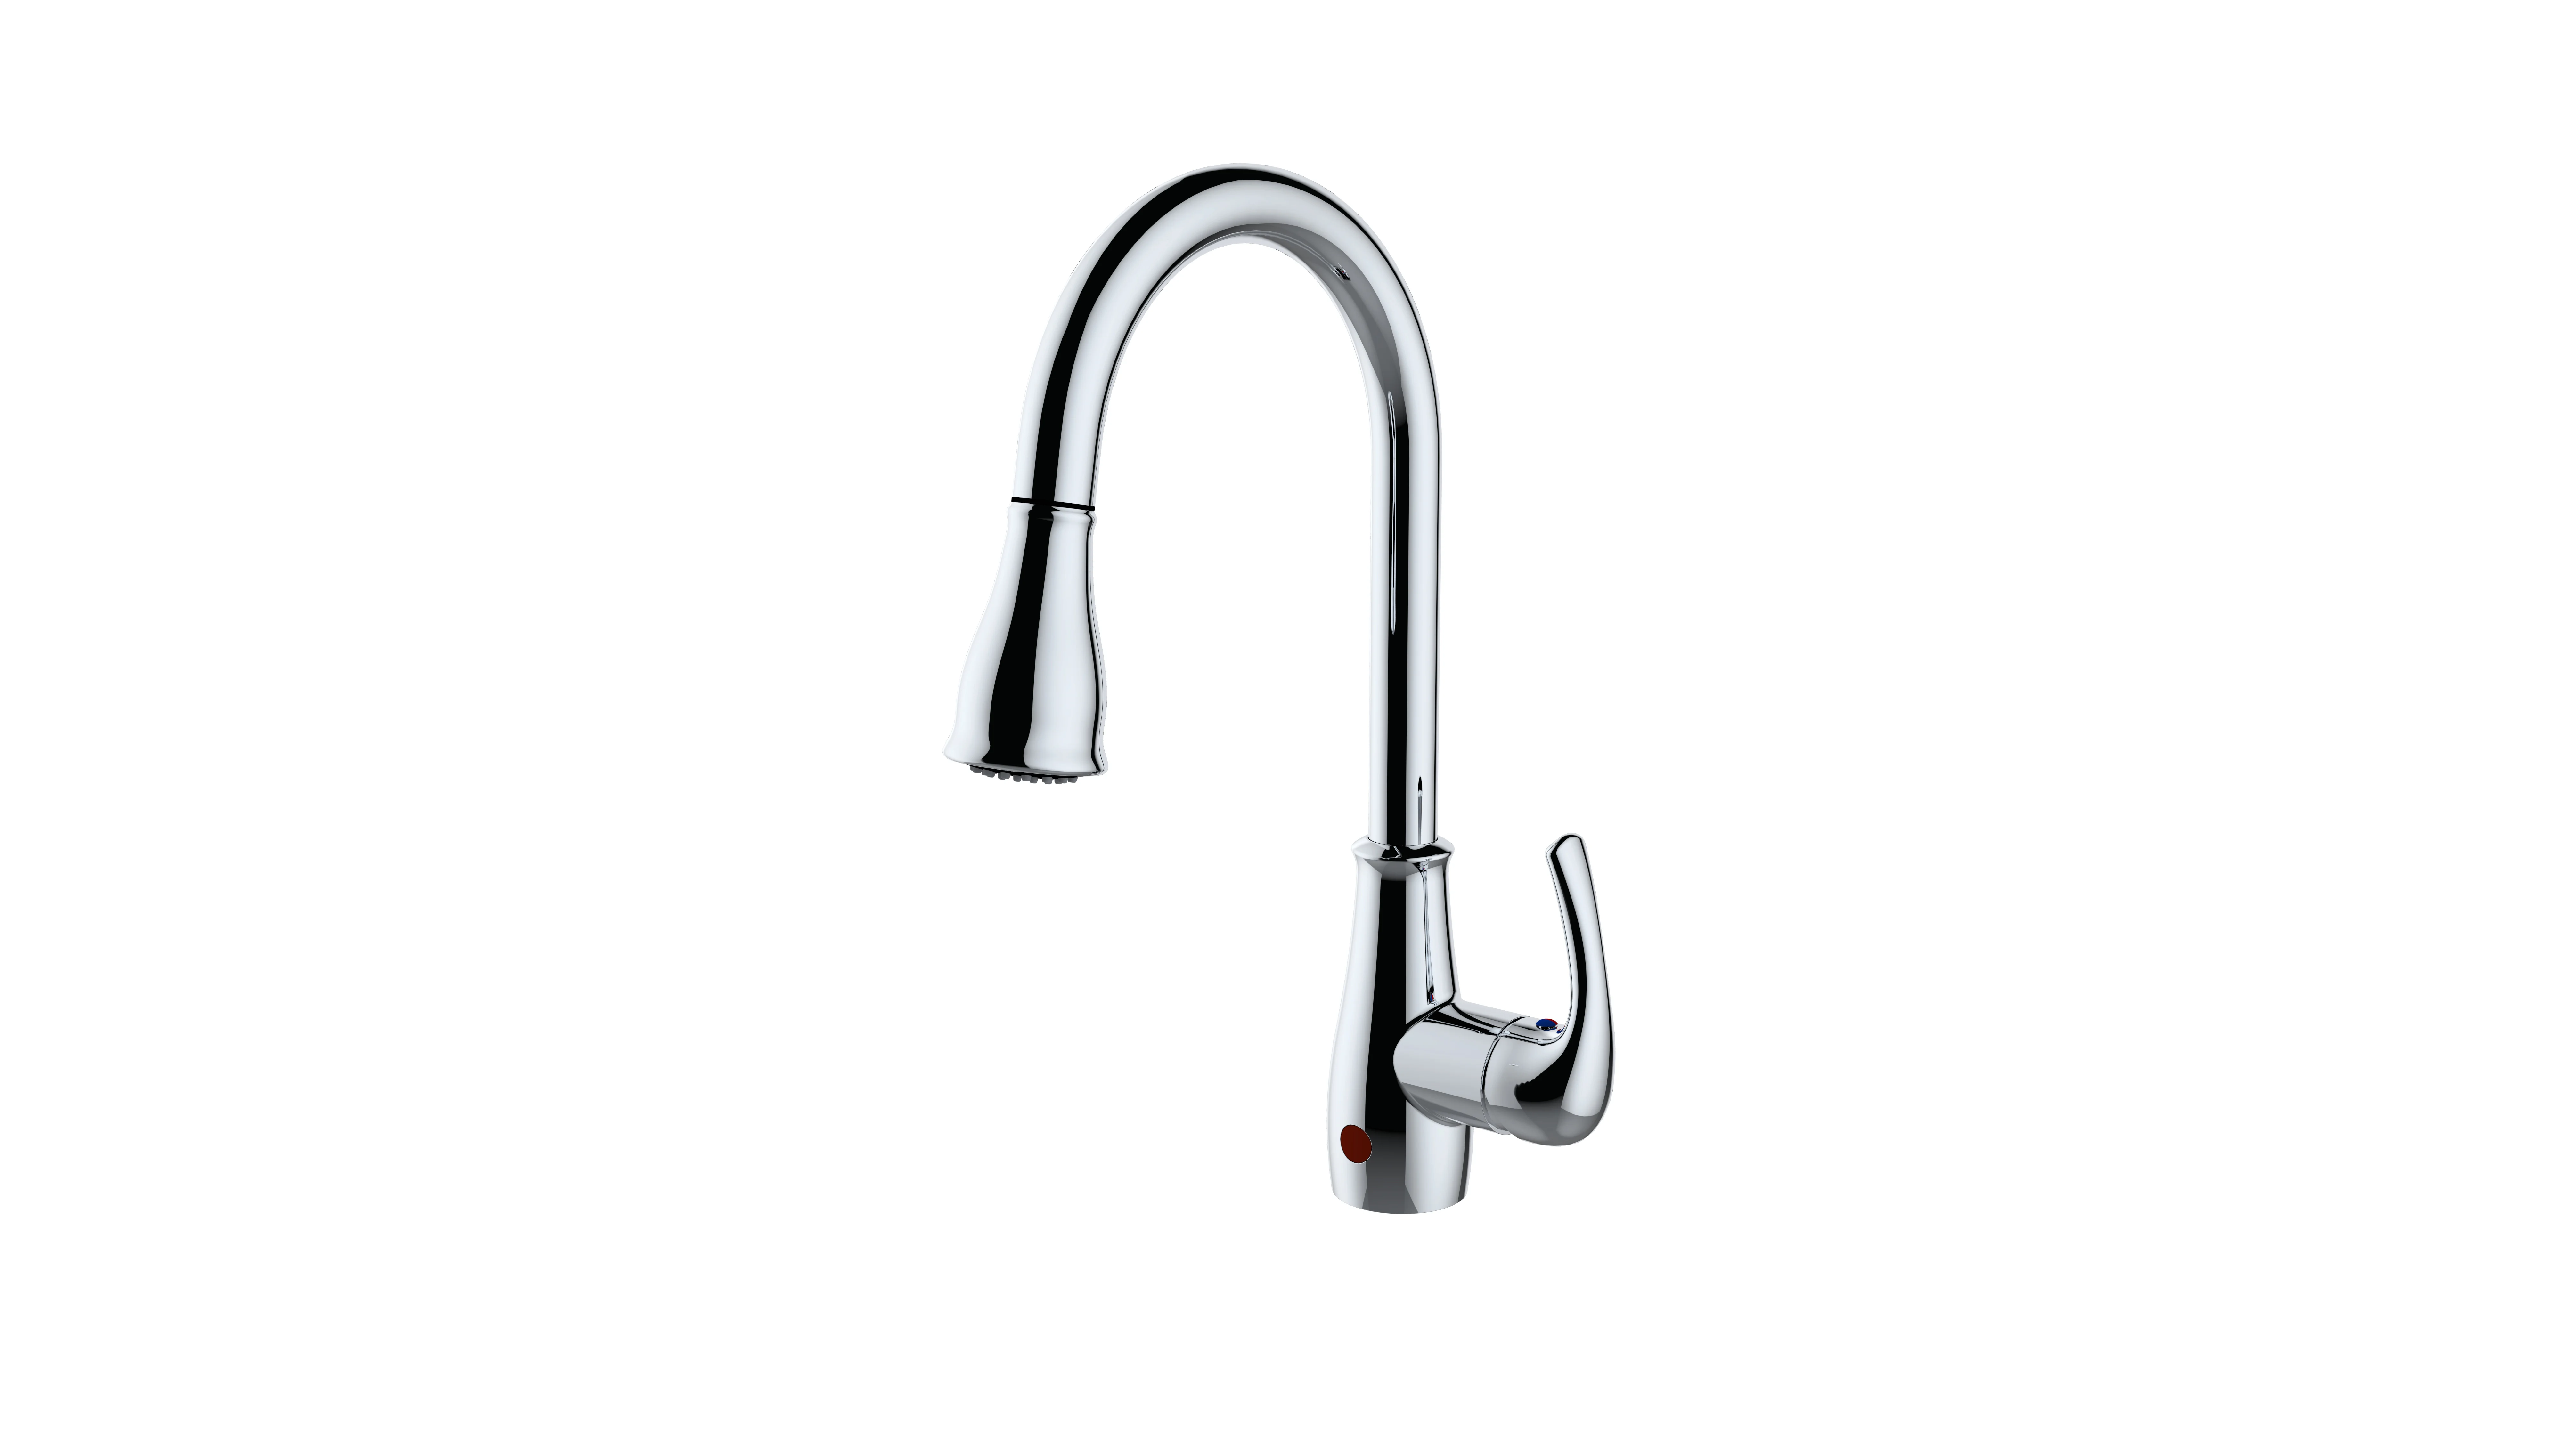 Single-Handle Kitchen Pull-Down Faucet with Magnetic Docking Spray Head, Chrome